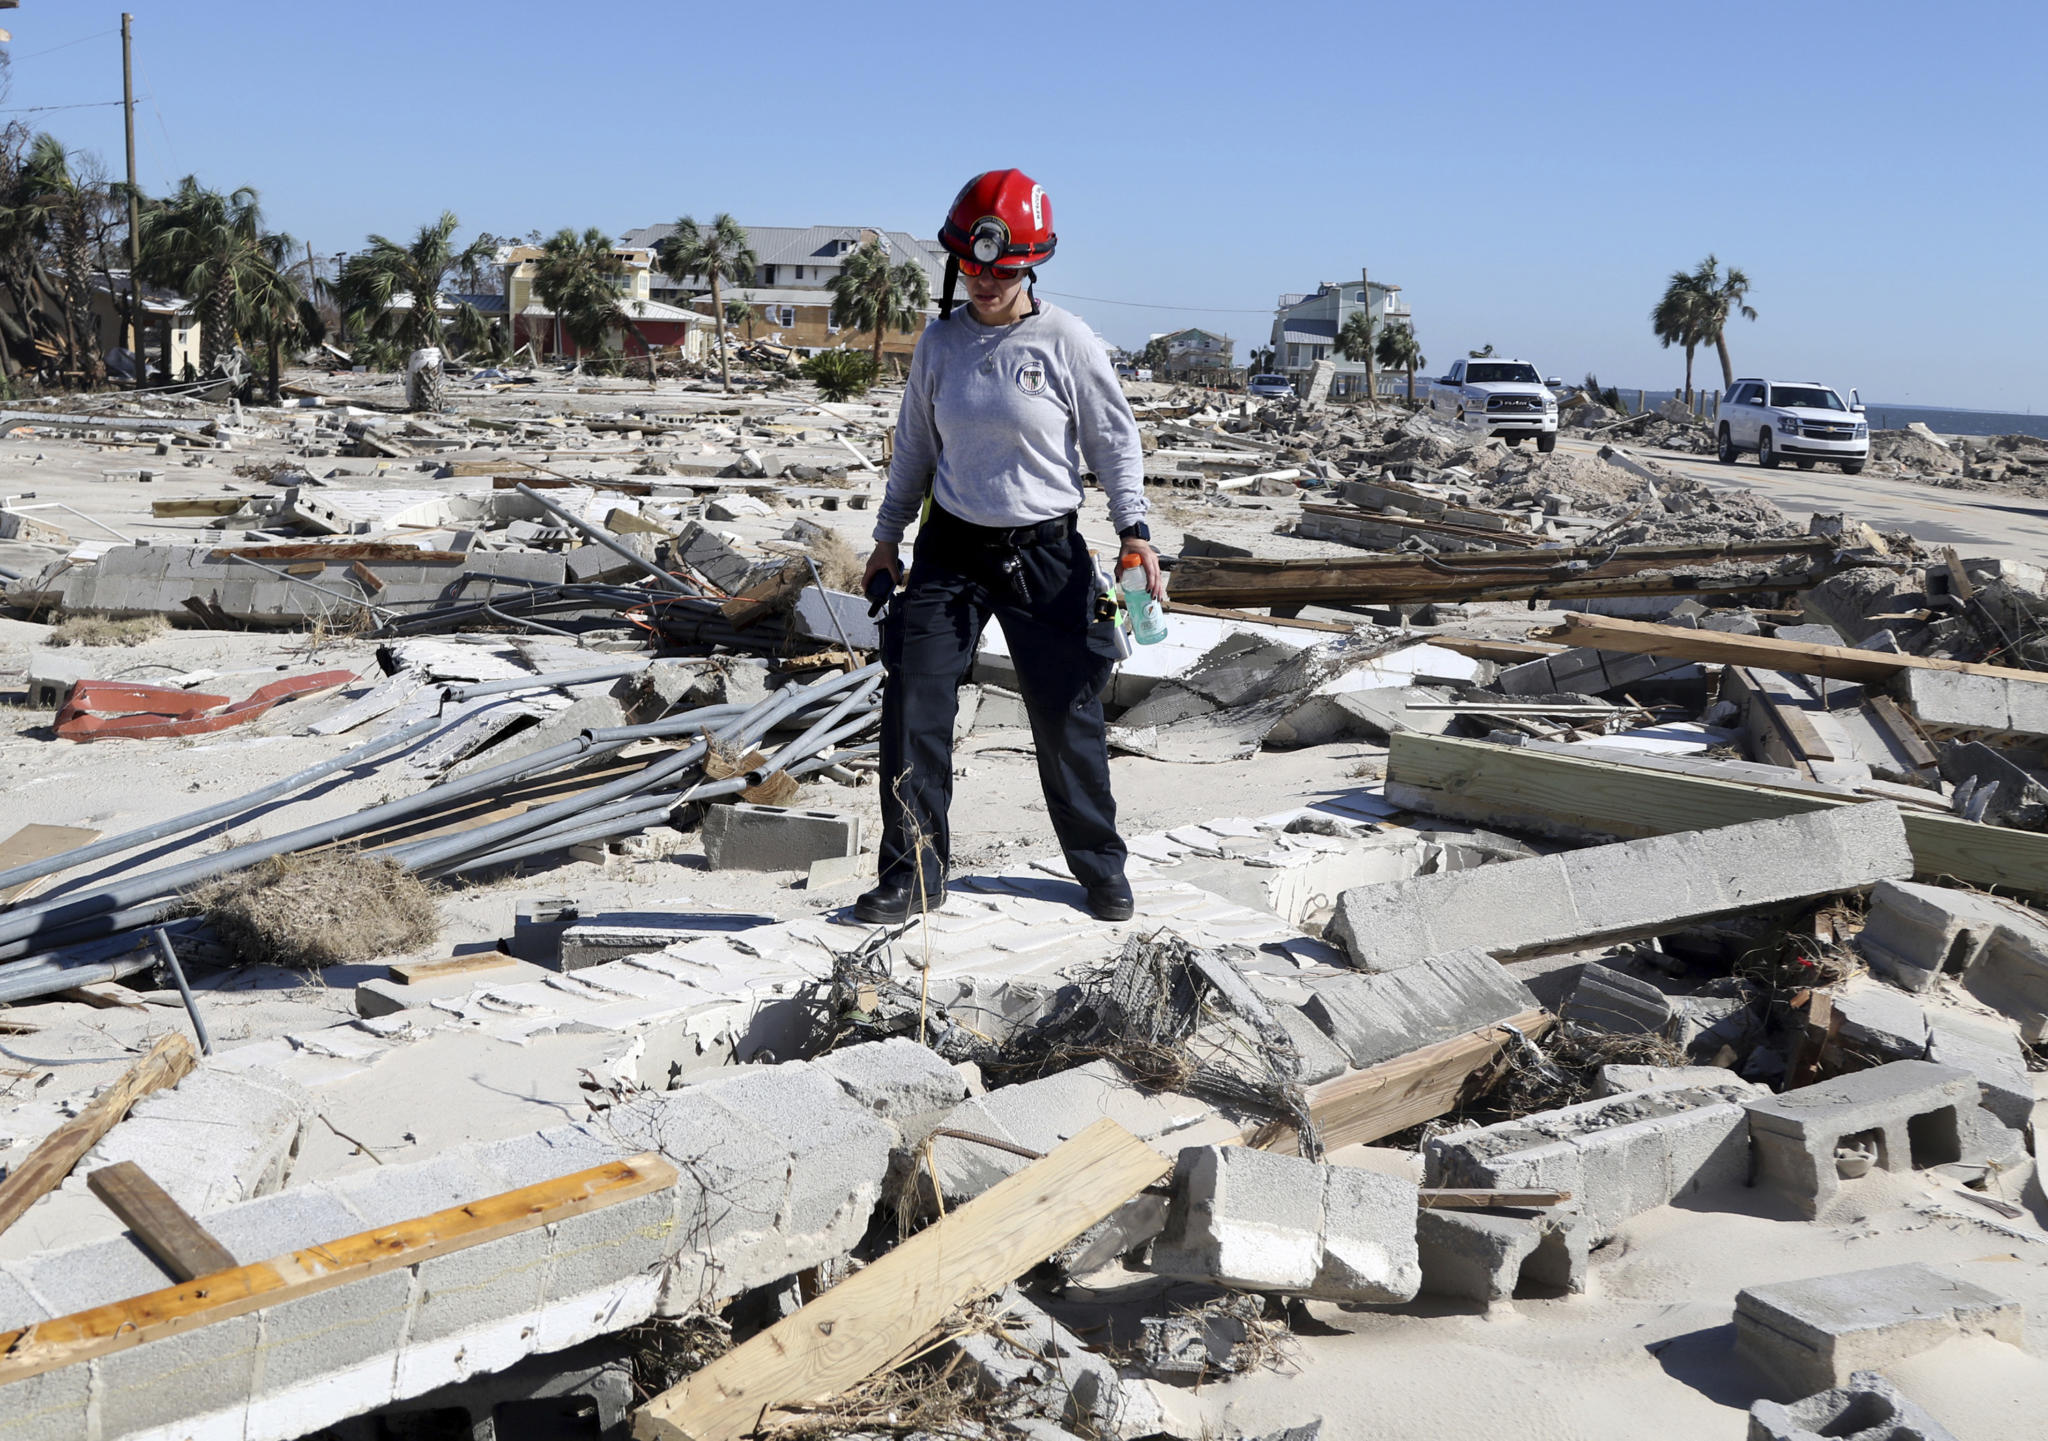 A Miami firefighter searches for survivors Friday, Oct. 12, 2018 in Mexico Beach, Fla. Mexico Beach, Florida was devastated when Hurricane Michael made landfall on Wednesday in the Florida Panhandle. (Douglas R. Clifford/Tampa Bay Times via AP)